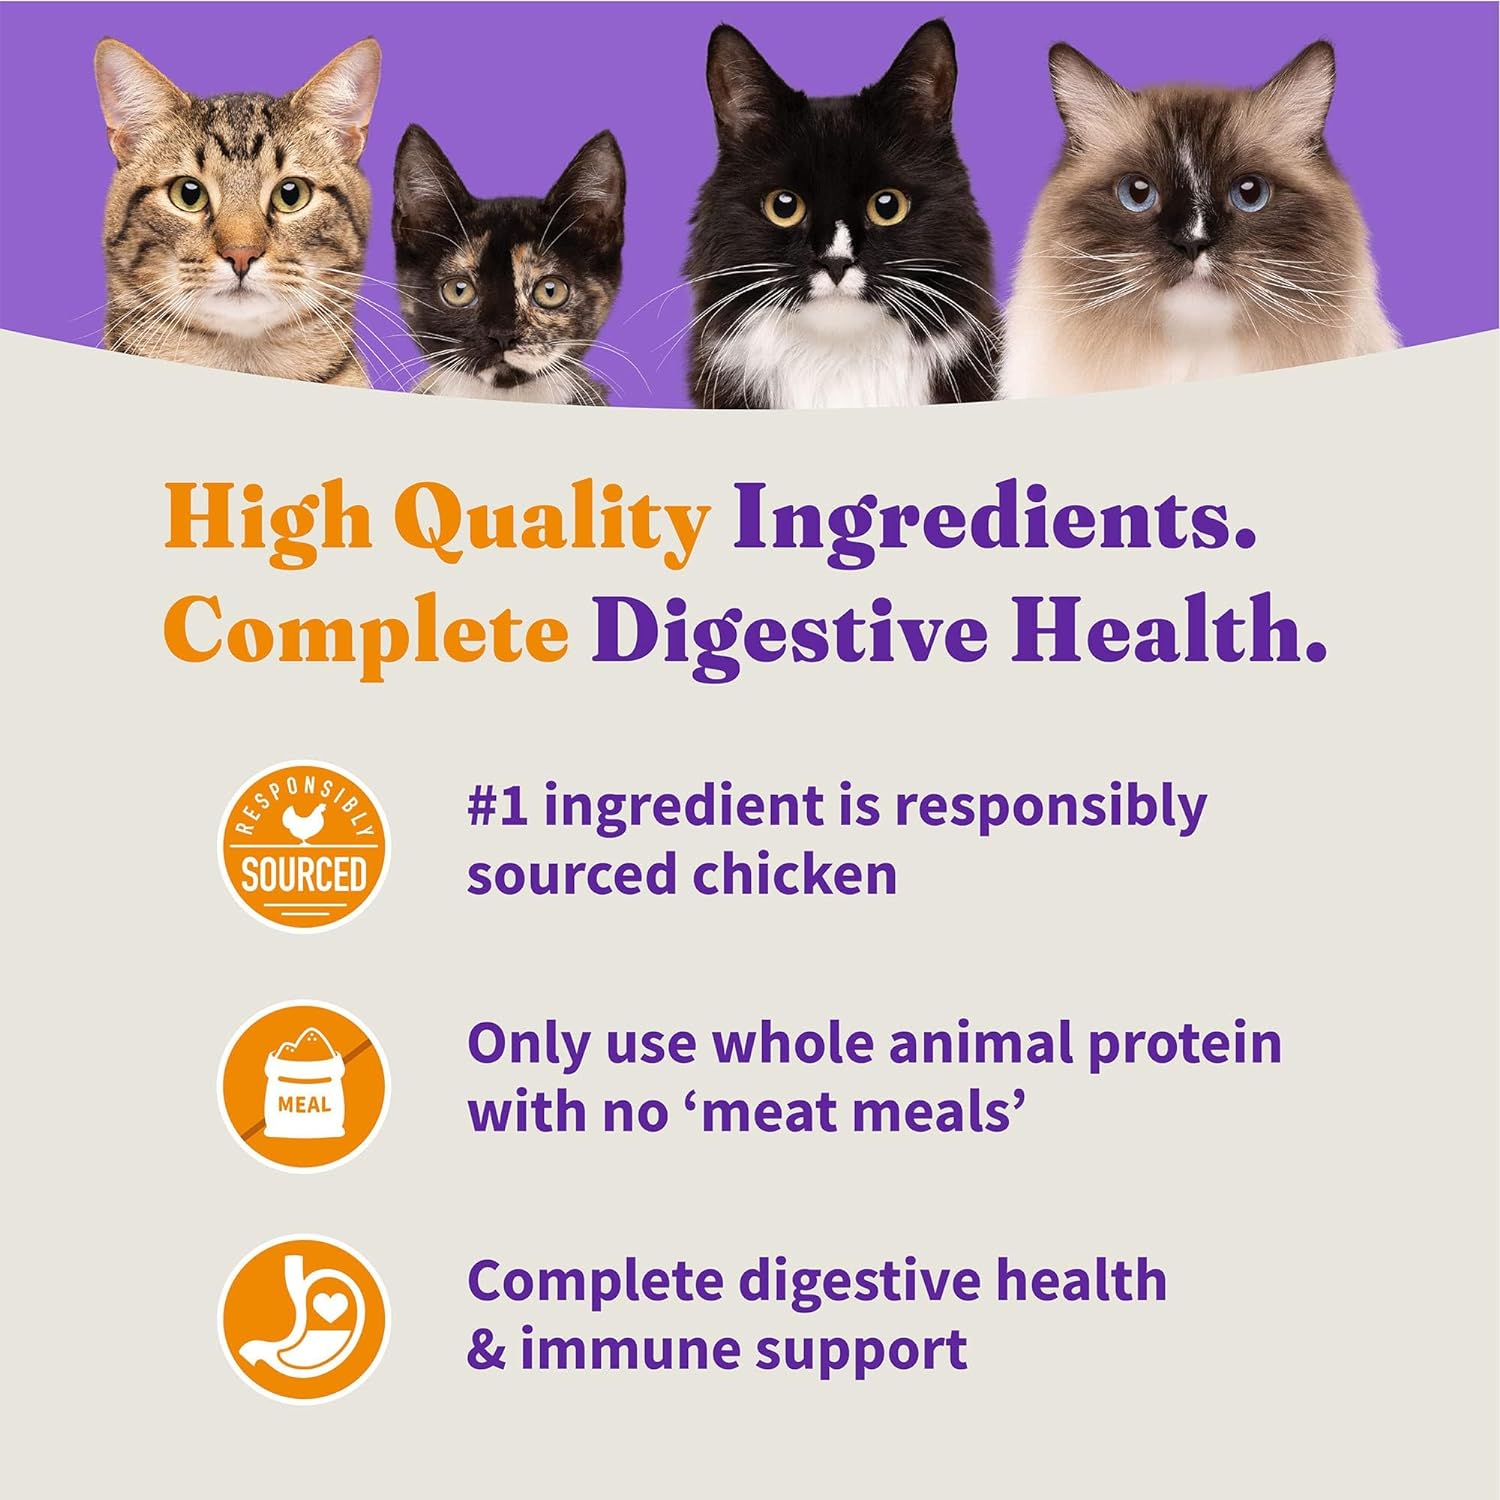 Halo Holistic Indoor Cat Food Dry, Grain Free Cage-free Chicken Recipe for healthy weight support, Complete Digestive Health, Dry Cat Food Bag, Adult Formula, 3-lb Bag : Dry Pet Food : Pet Supplies